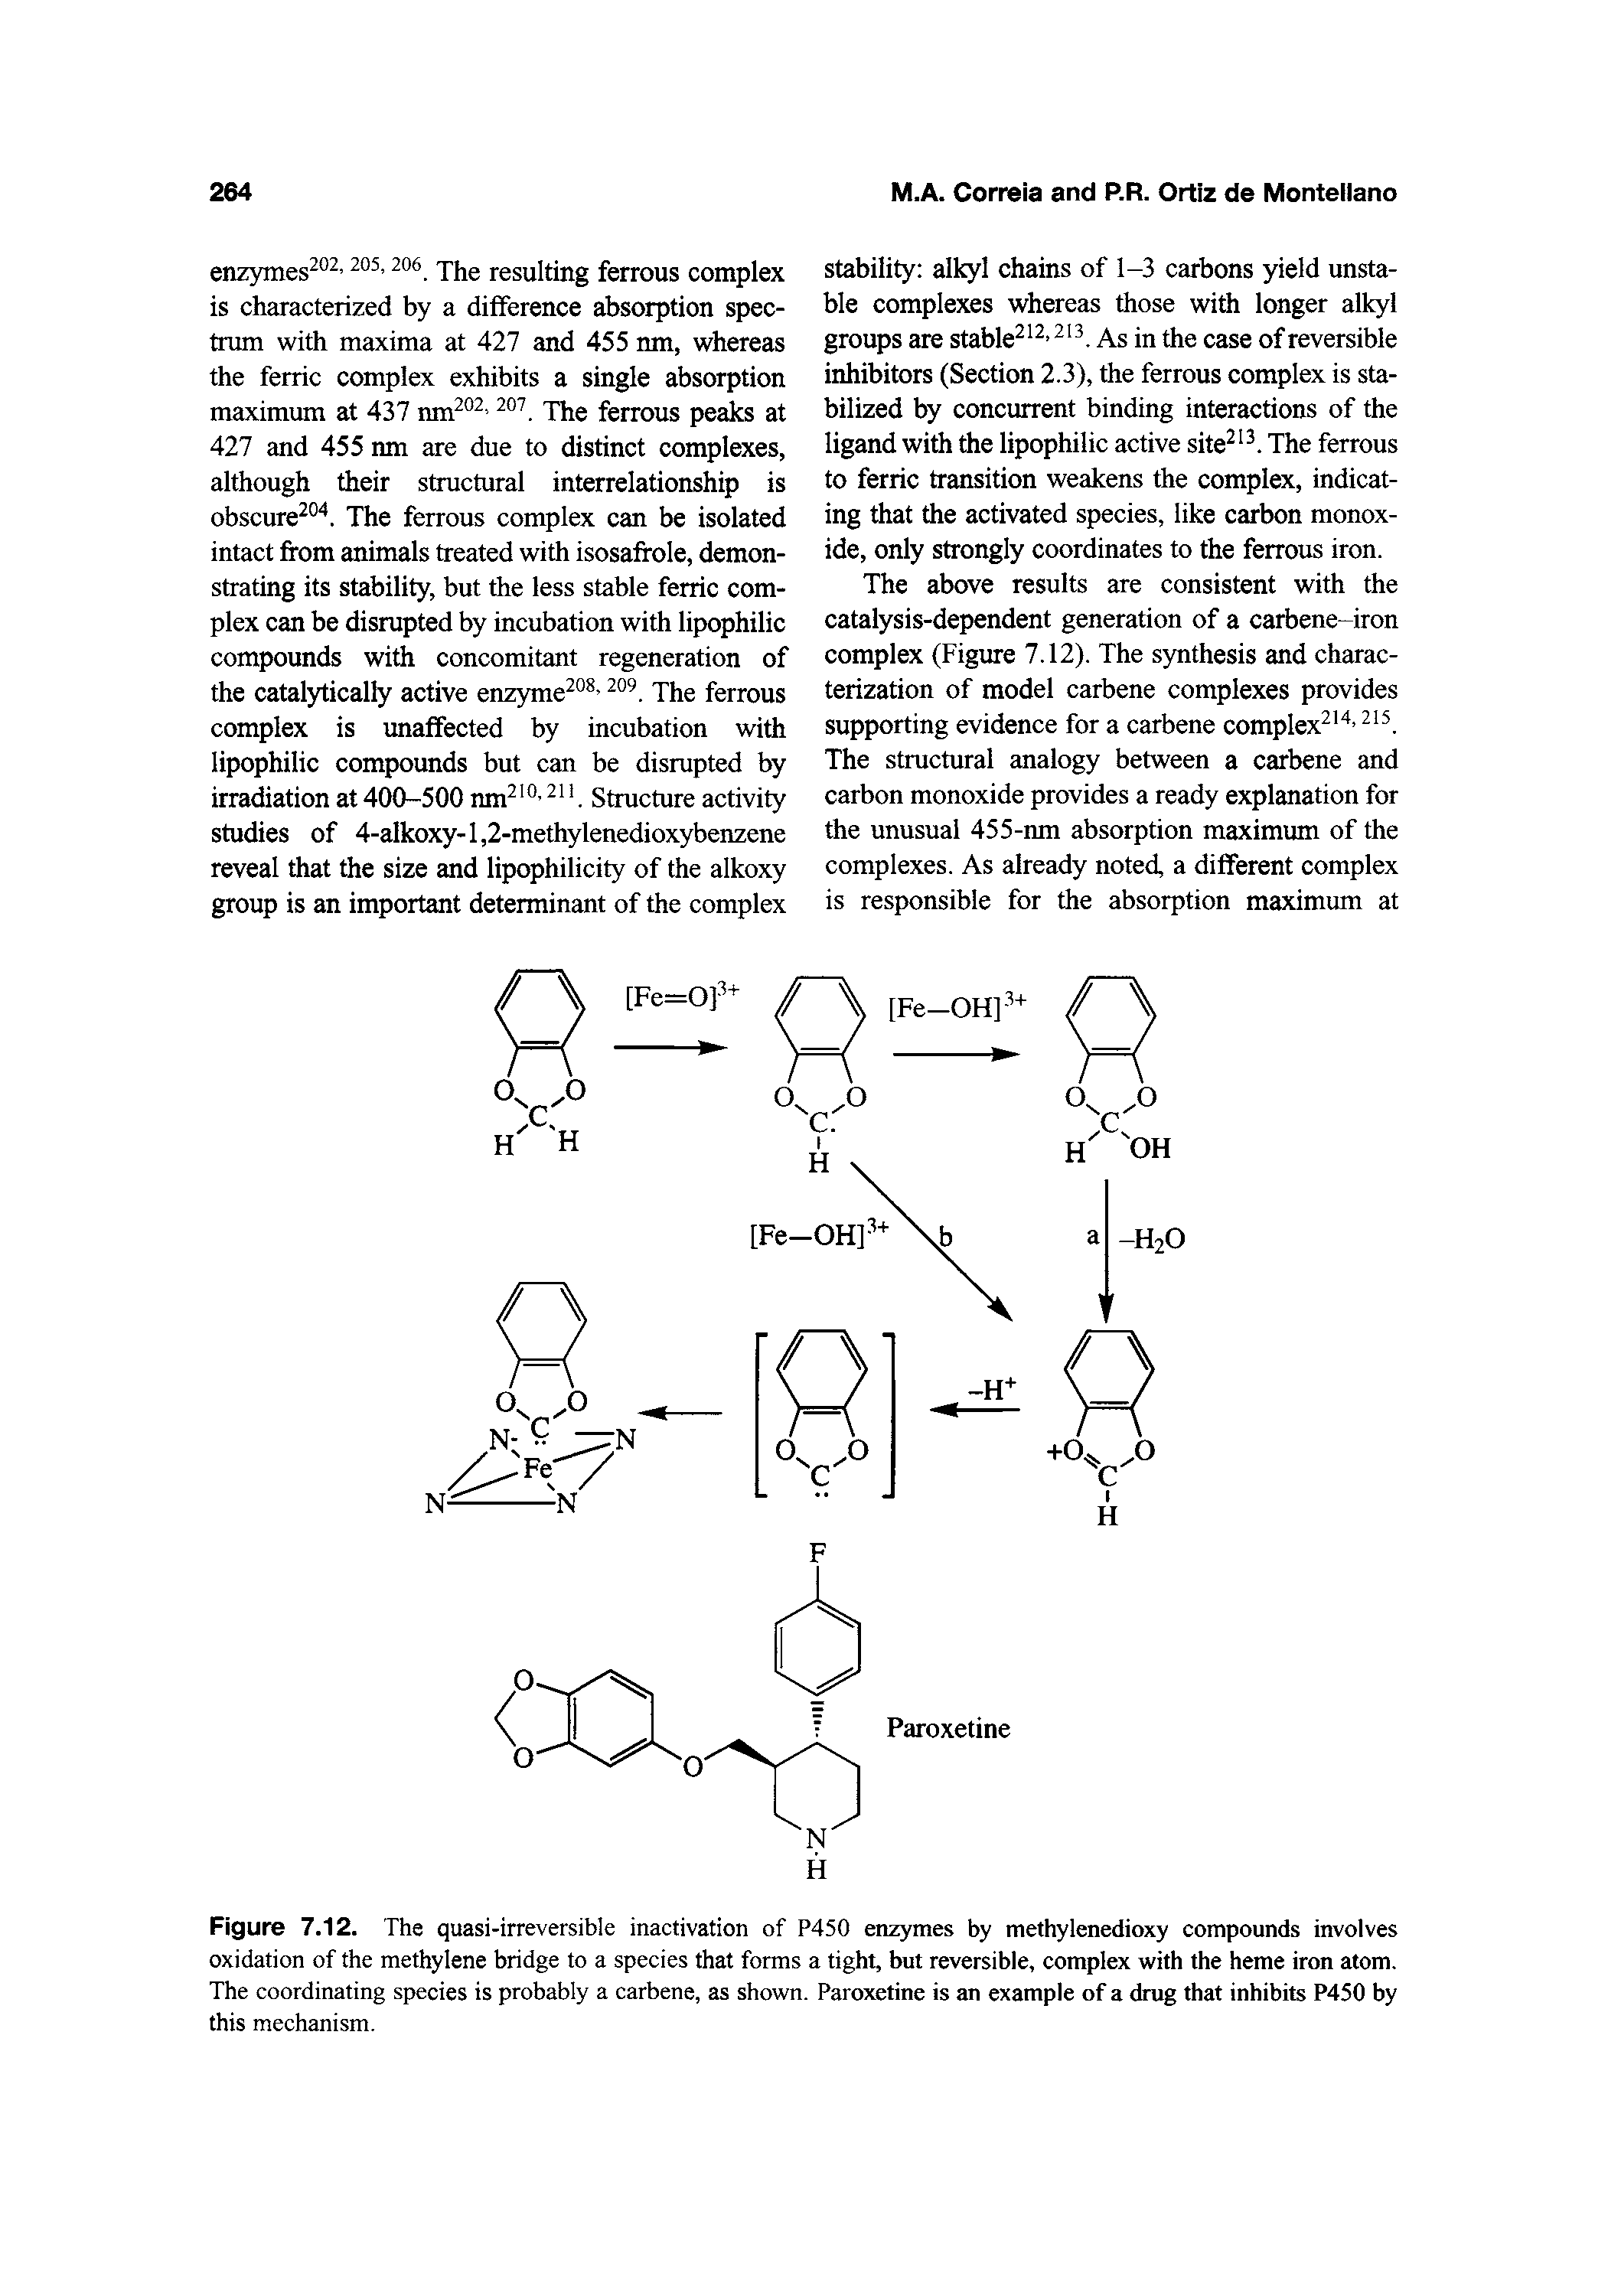 Figure 7.12. The quasi-irreversible inactivation of P450 enzymes by methylenedioxy compounds involves oxidation of the methylene bridge to a species that forms a tight, but reversible, complex with the heme iron atom. The coordinating species is probably a carbene, as shown. Paroxetine is an example of a drug that inhibits P450 by this mechanism.